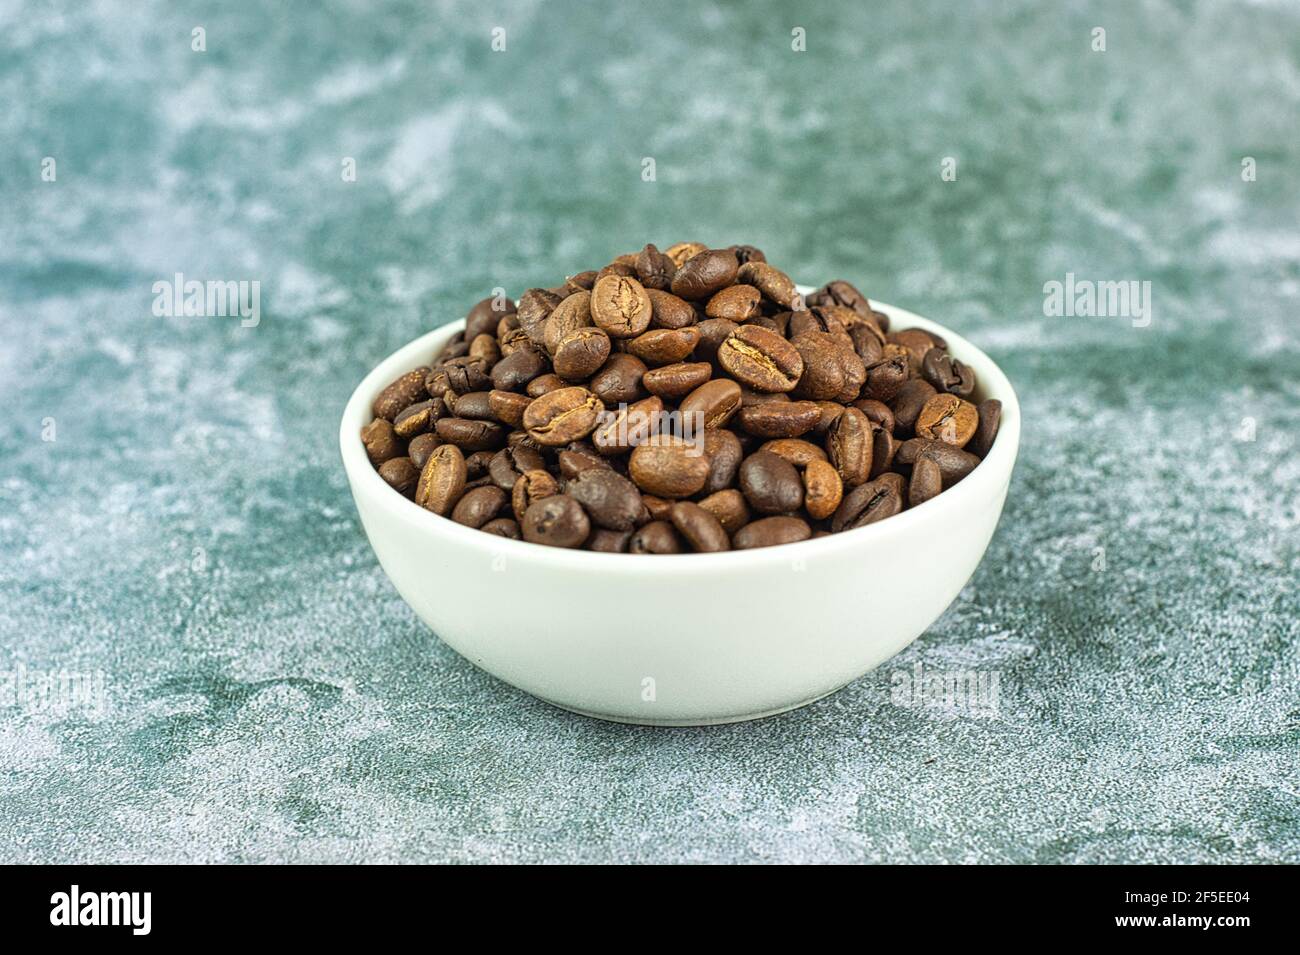 Pot of roasted coffee beans Stock Photo